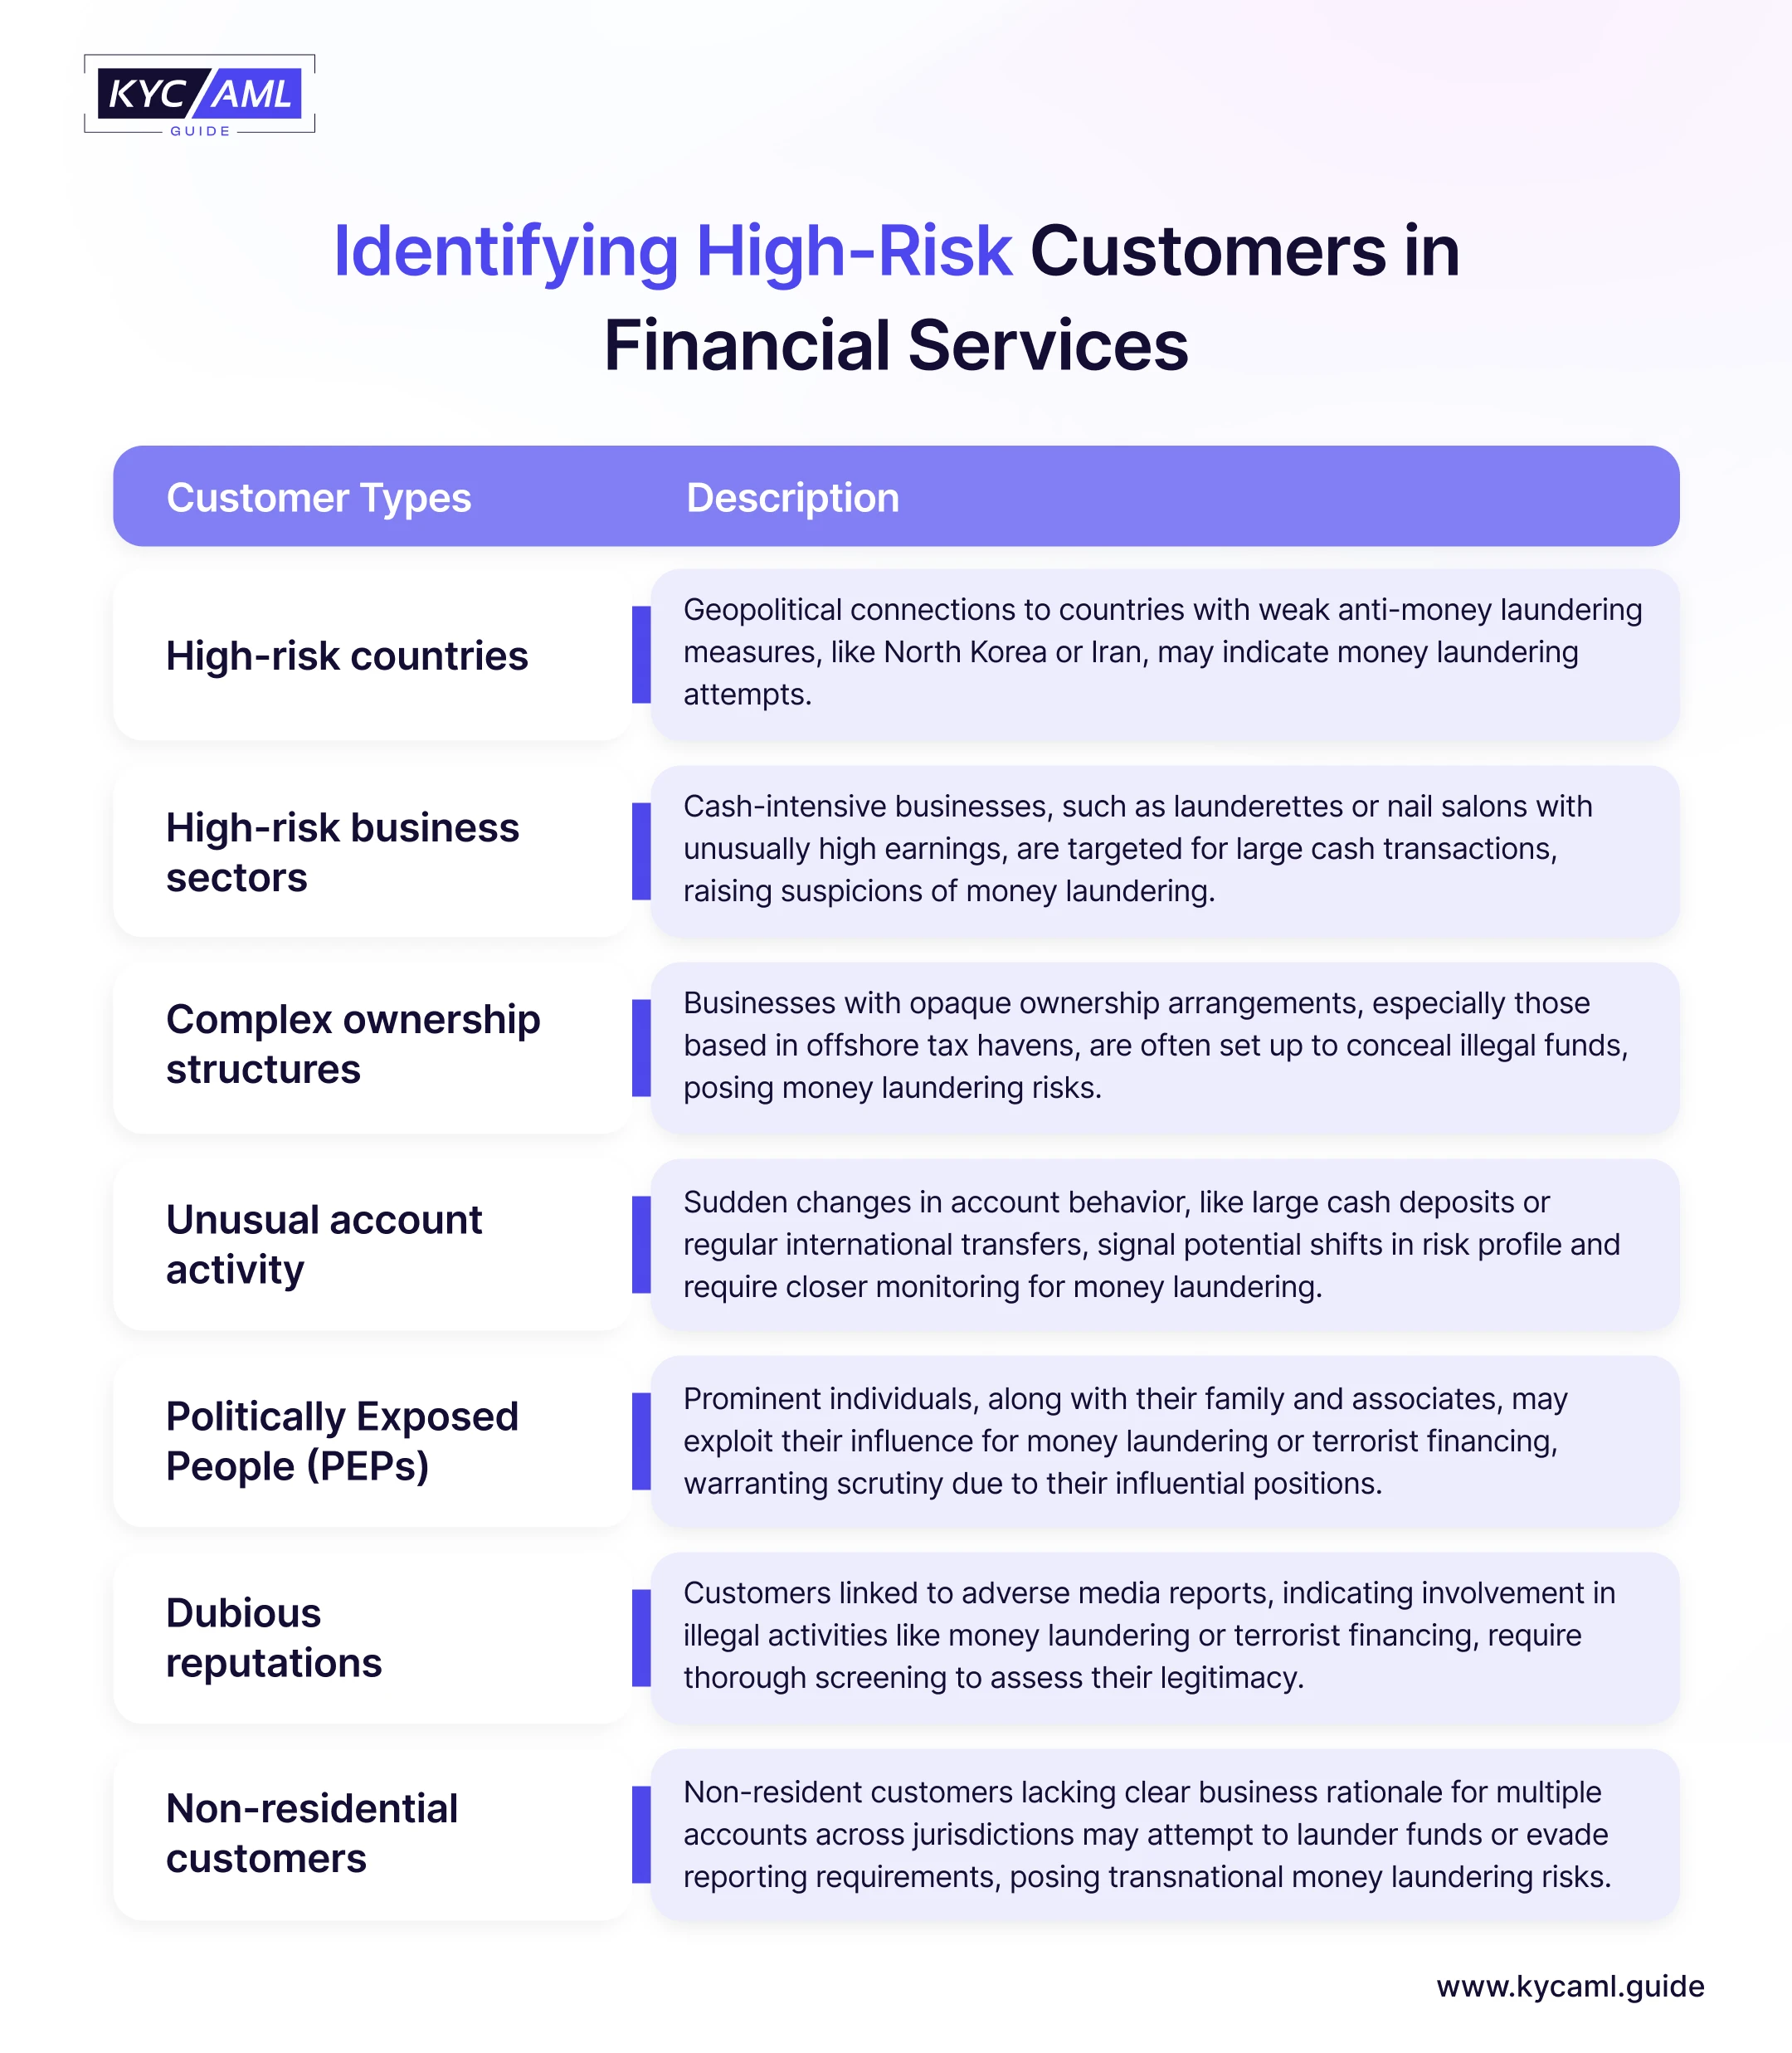 Identifying High-Risk Customers in Financial Services